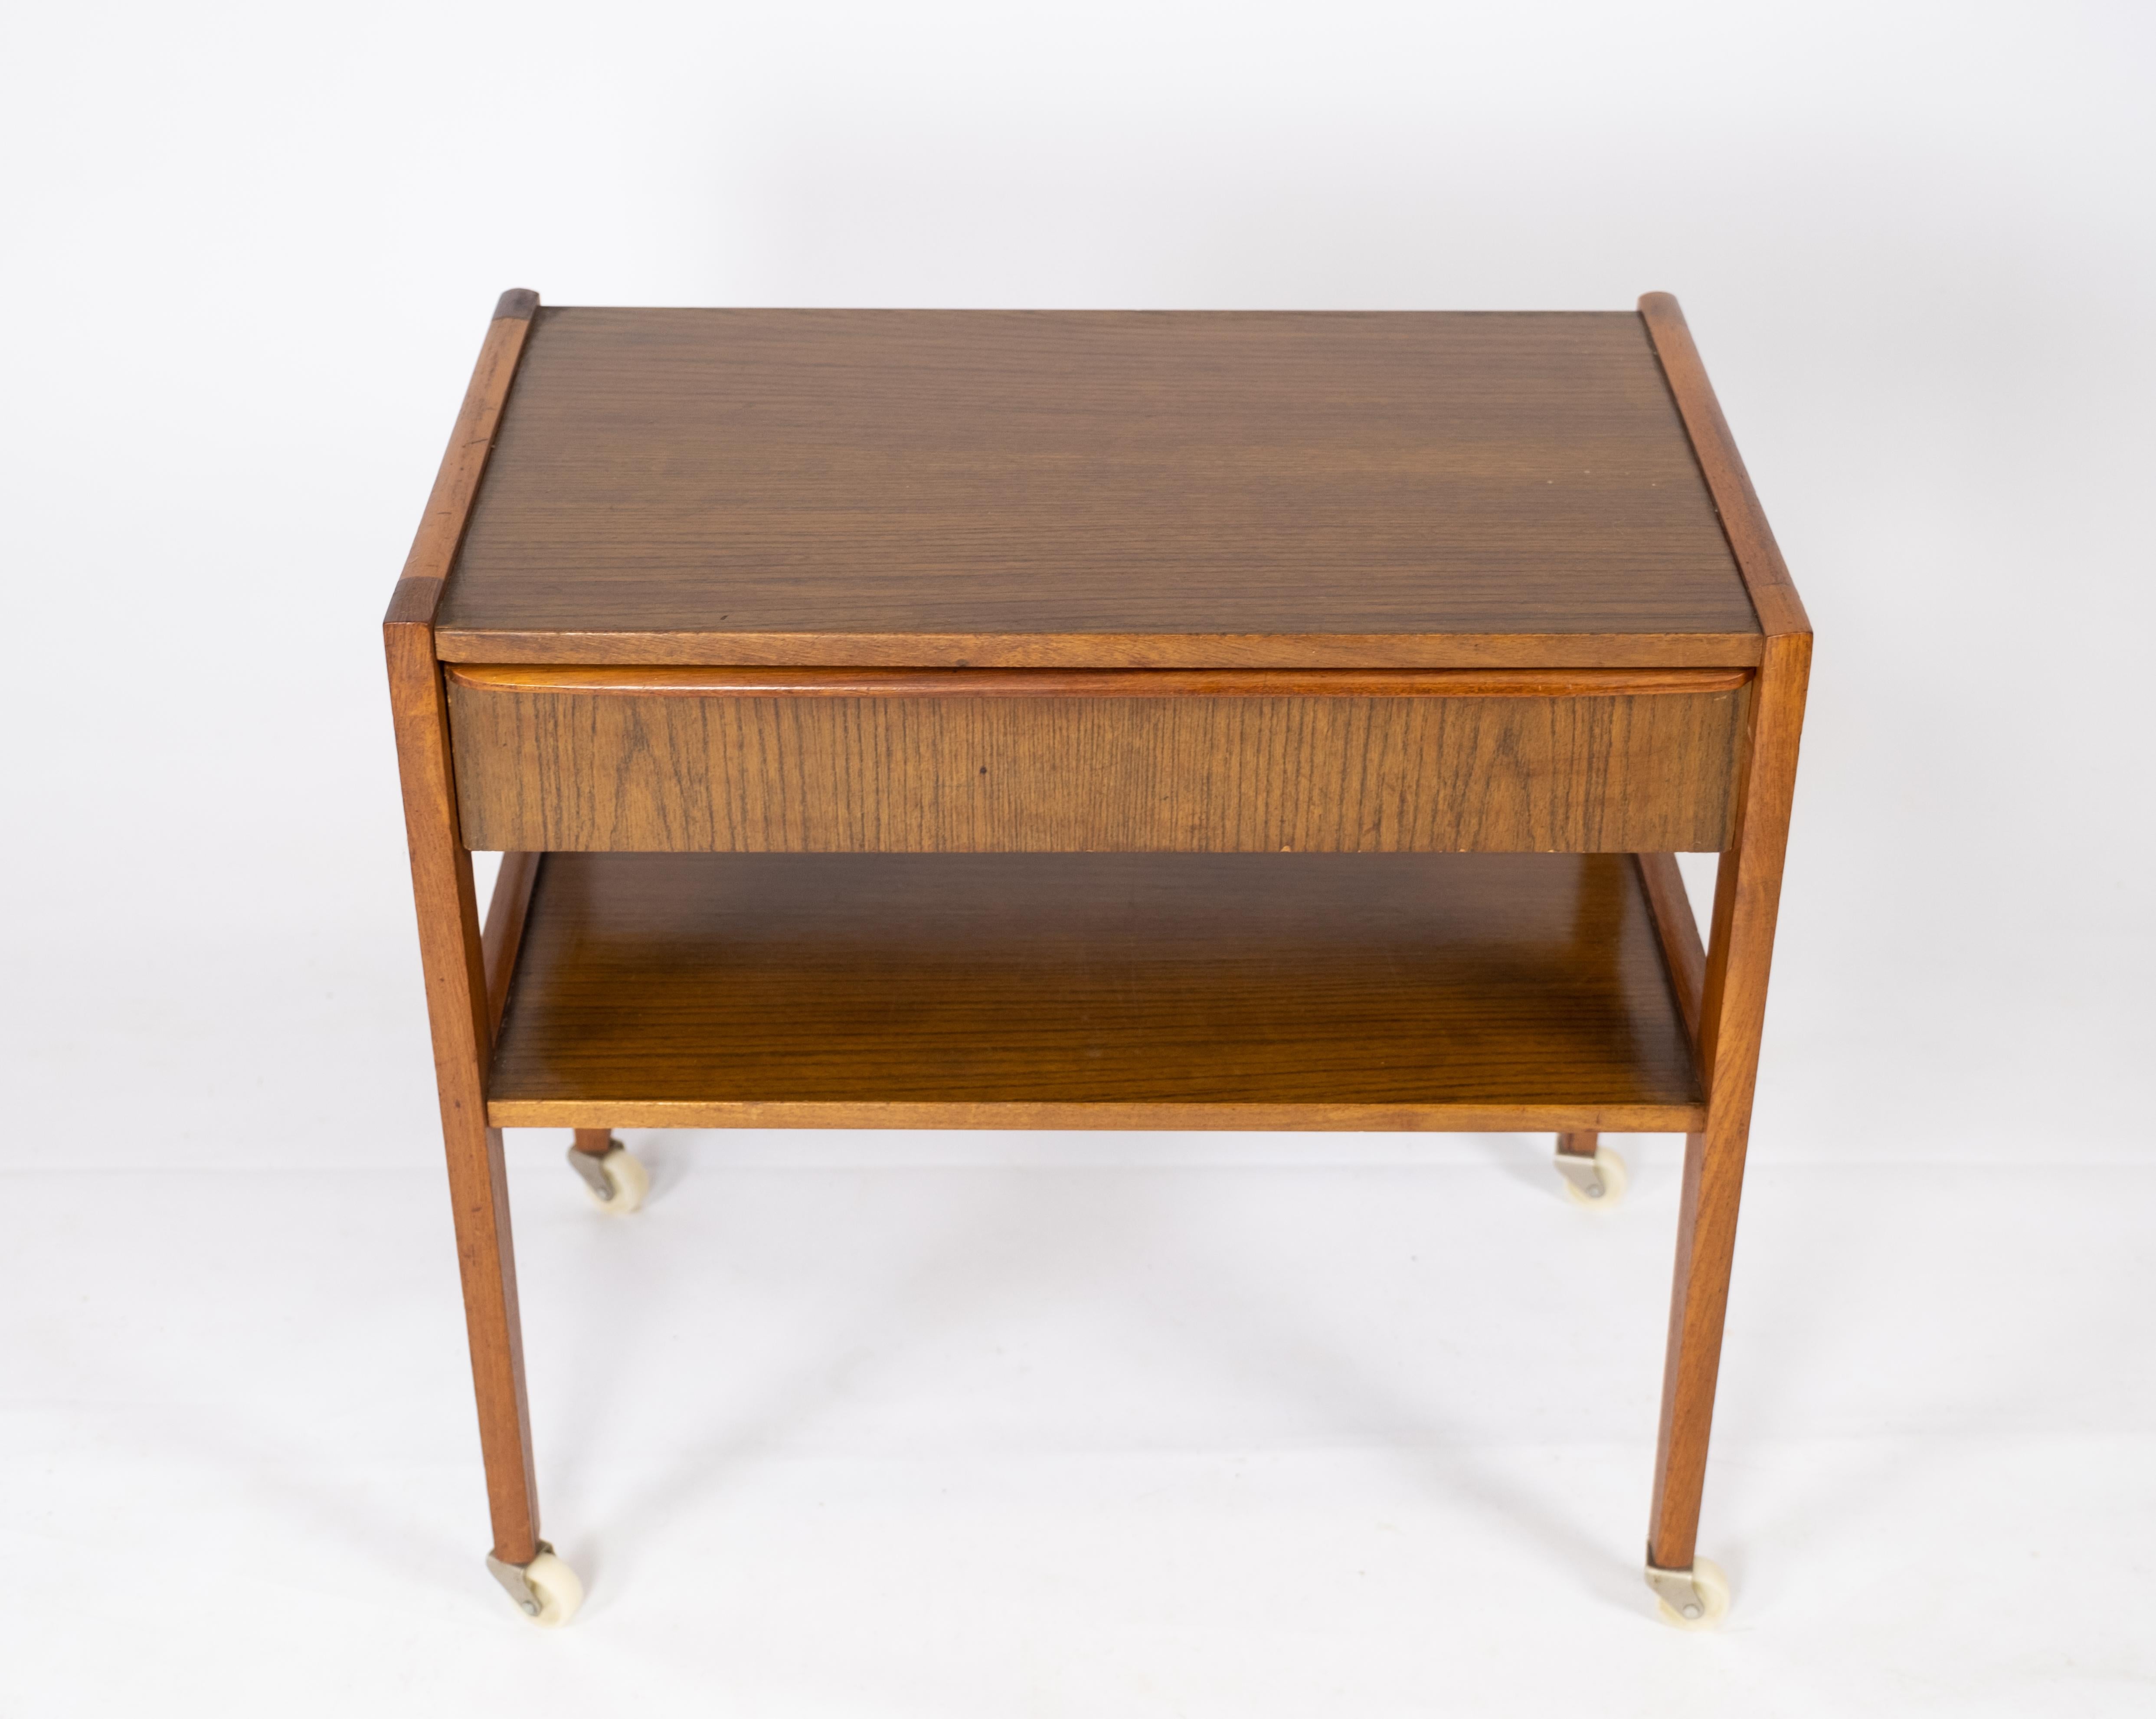 Small side table with drawer in teak of Danish design from the 1960s. The chest is in great vintage condition.

This product will be inspected thoroughly at our professional workshop by our educated employees, who assure the product quality

